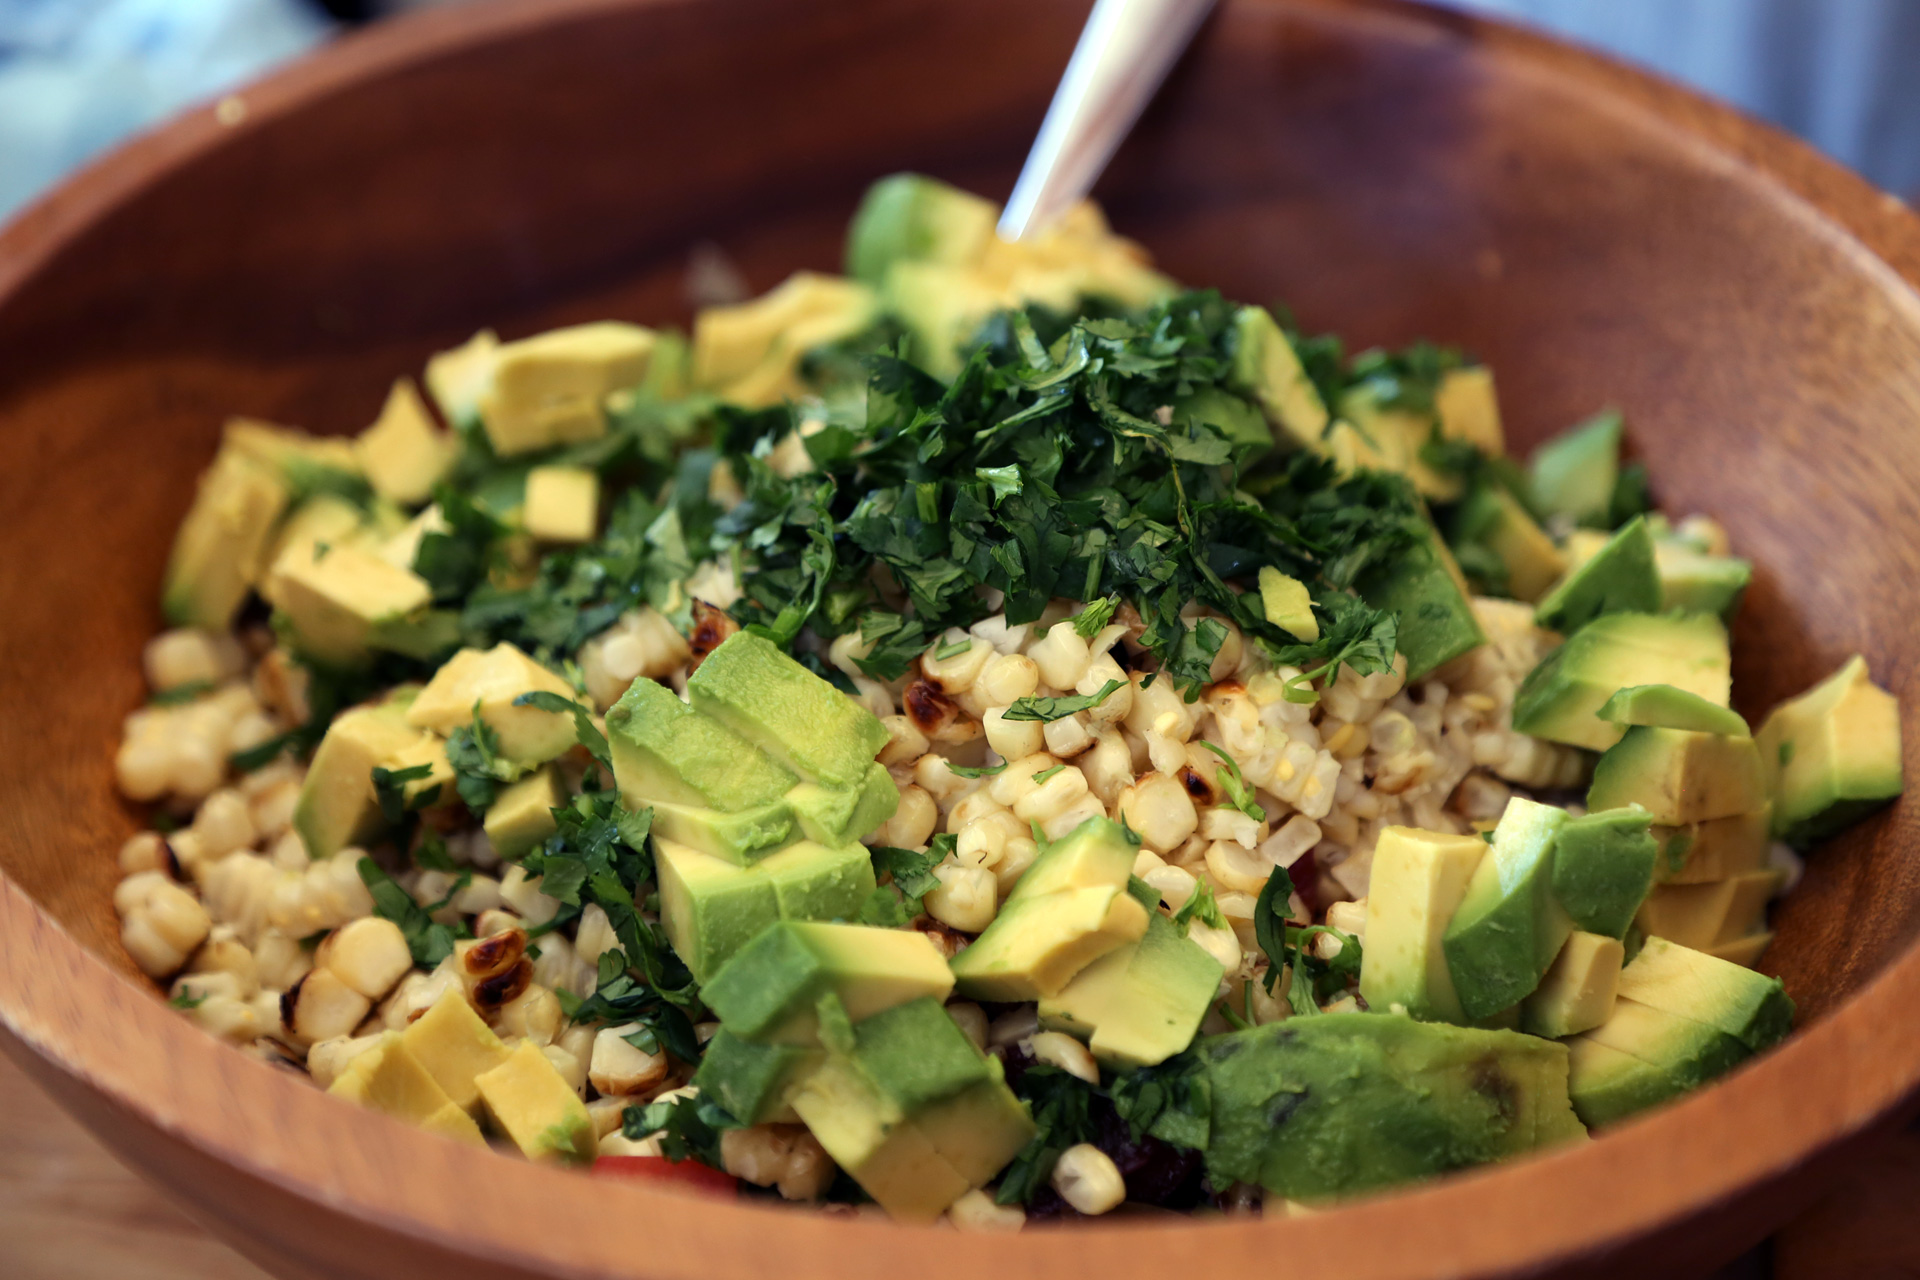 Add to the bowl along with the avocado chunks and cilantro.